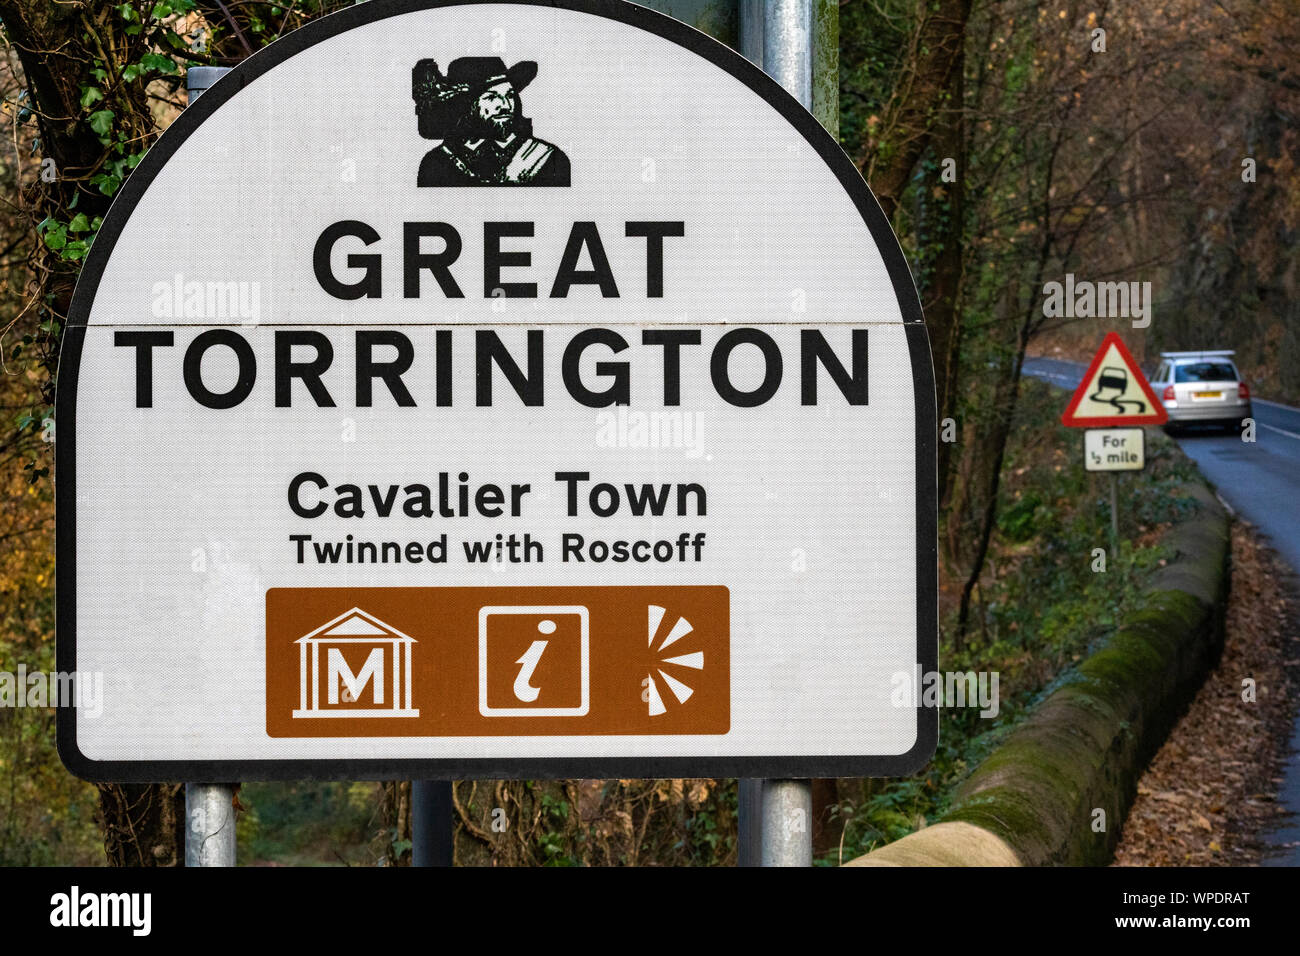 Great Torrington Official Welcome and Information Road Sign on the Main A386 Road into the Town With Warning ‘Bends’ Sign and a Passing Car. Stock Photo